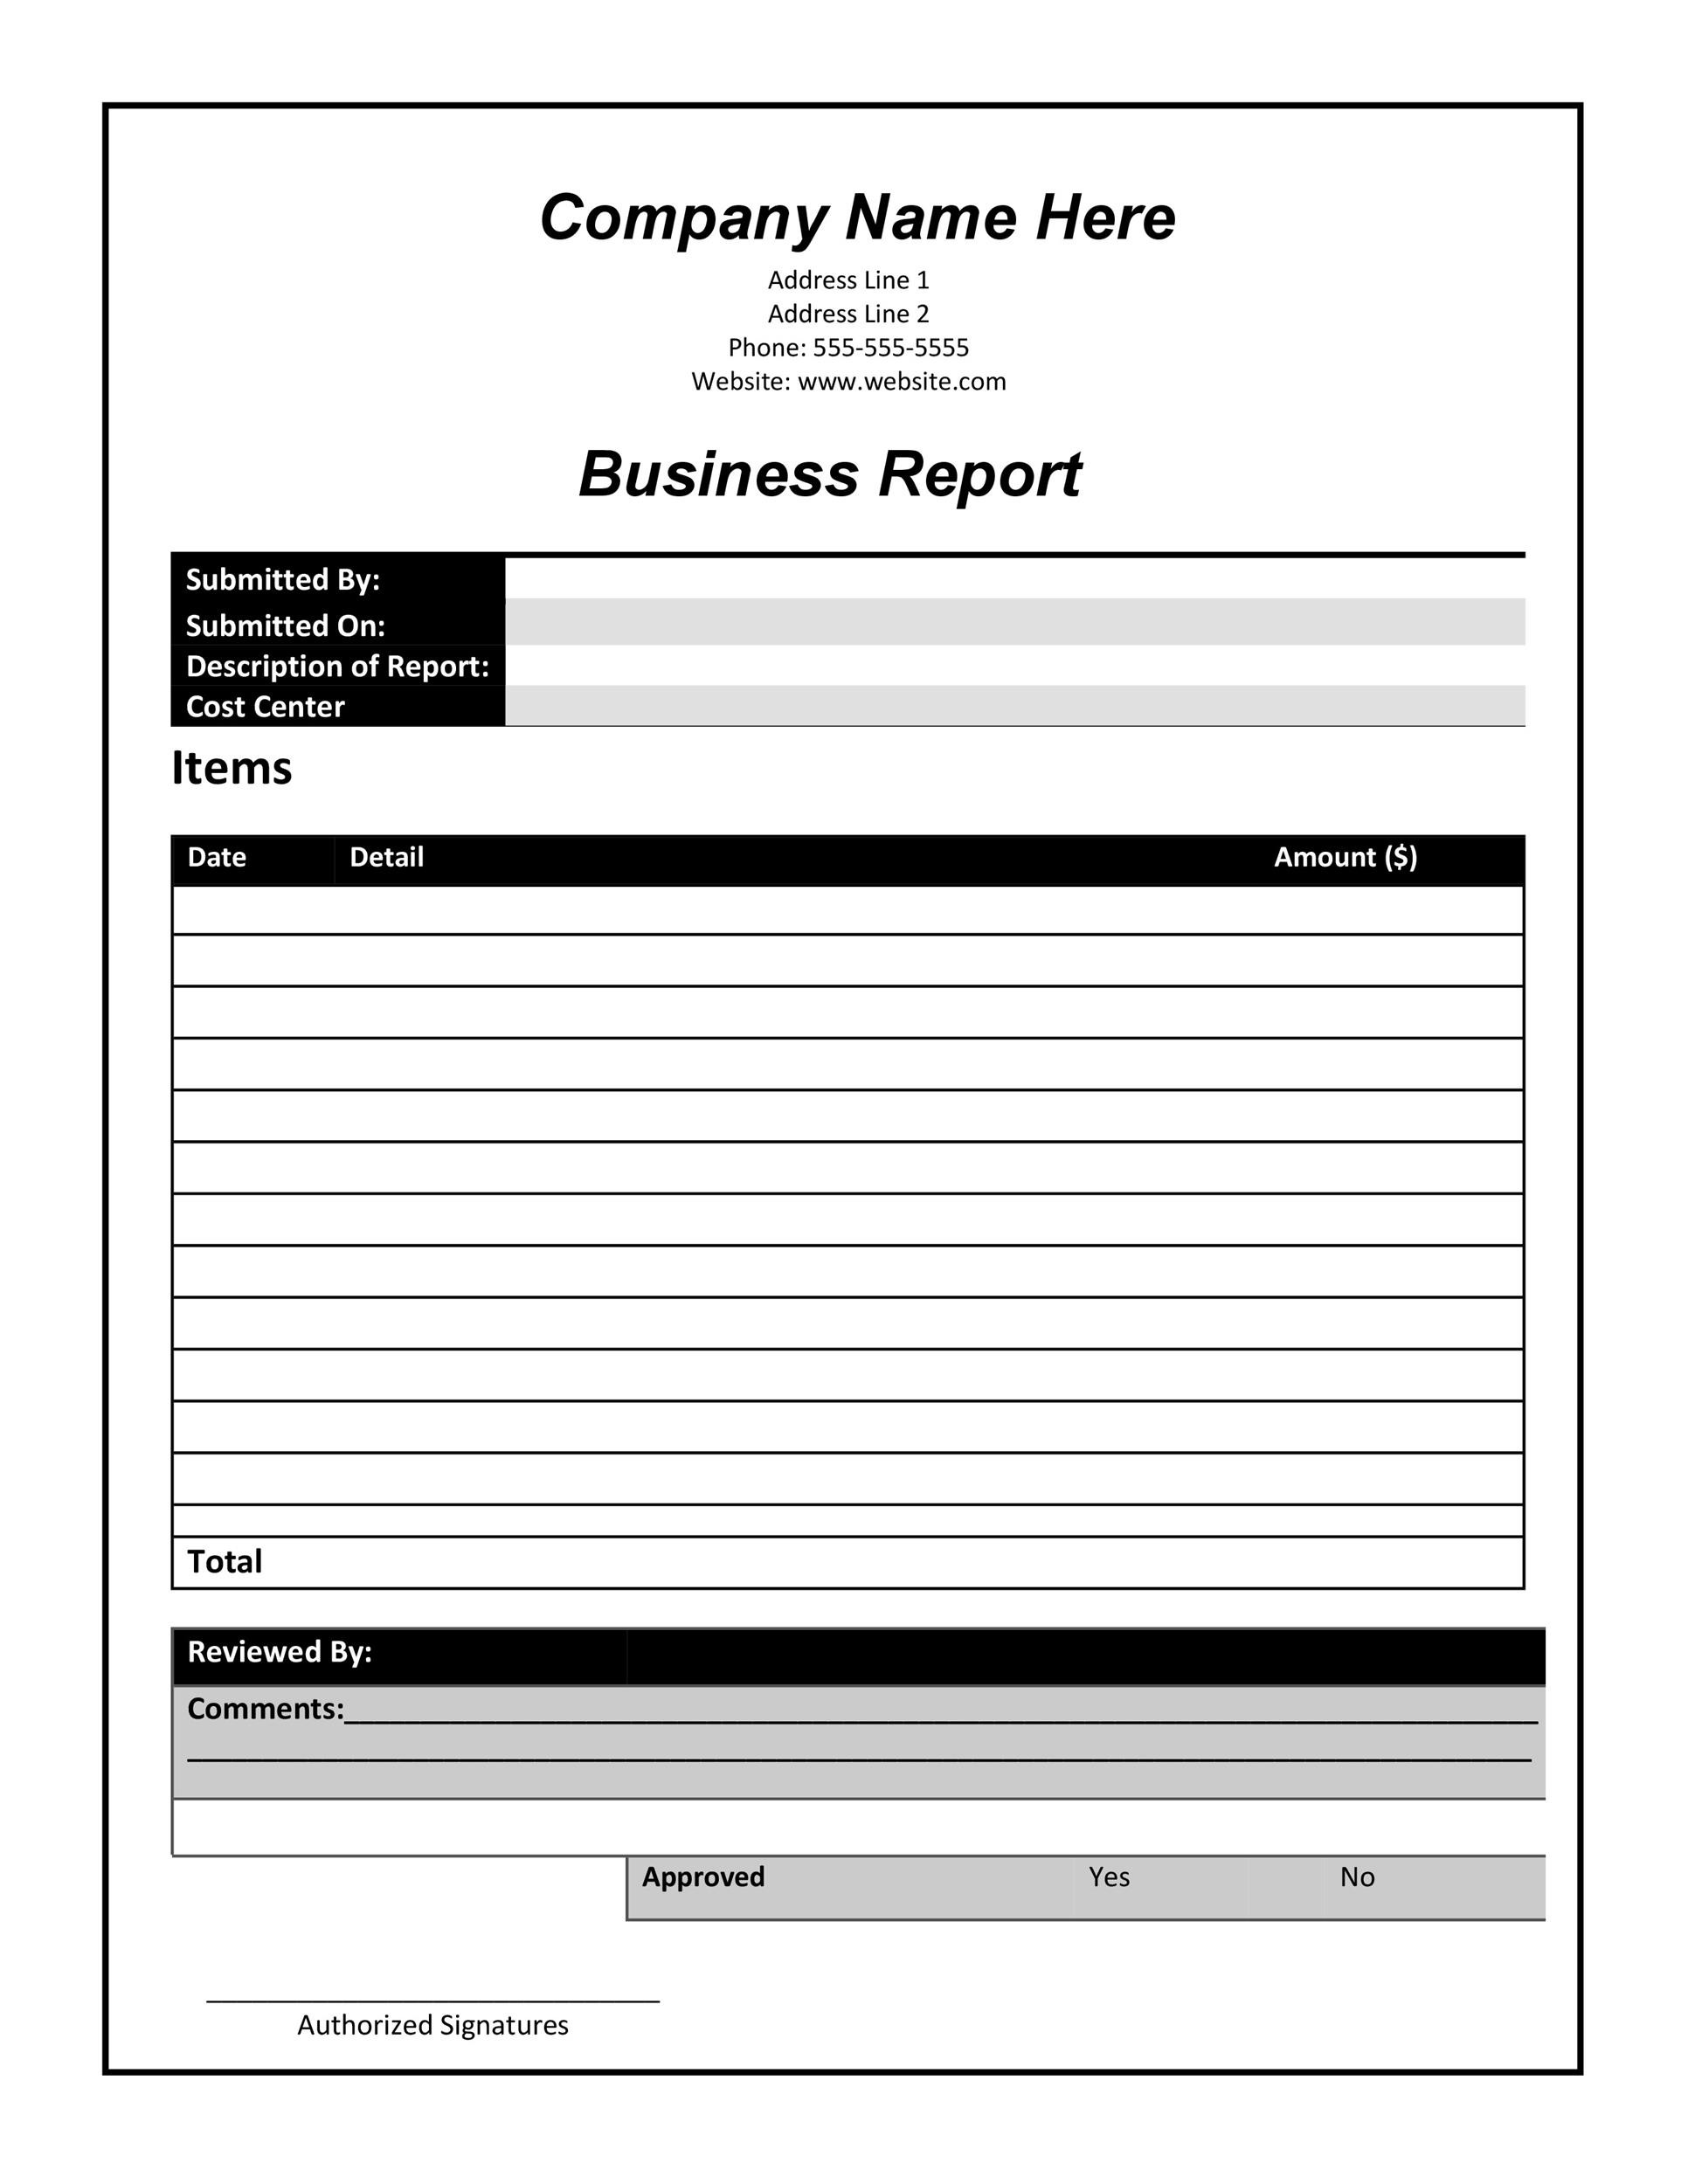 Business report template open office